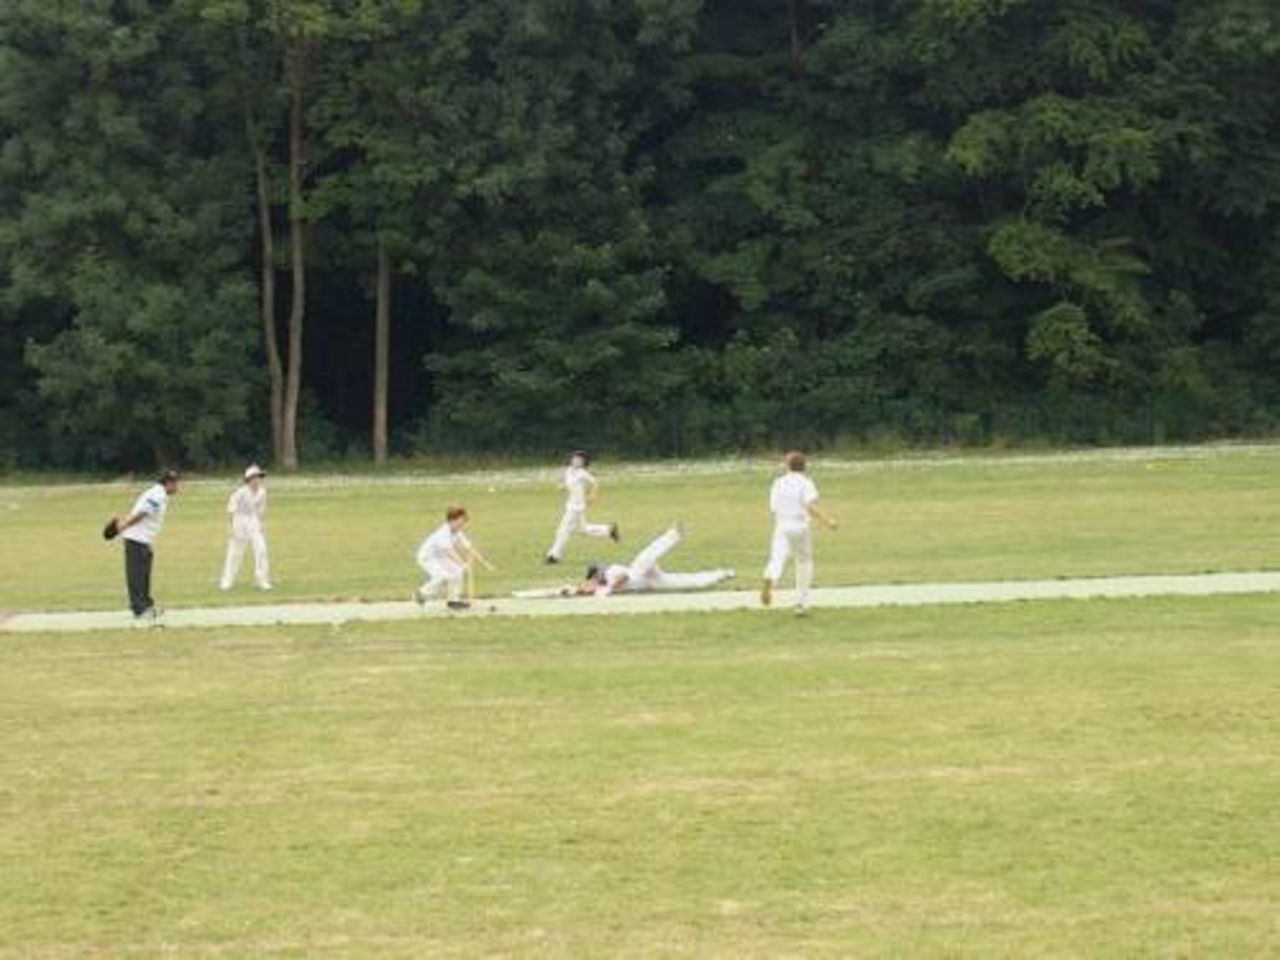 An Antwerp Indians Under-13 batsman makes a great dive for his crease